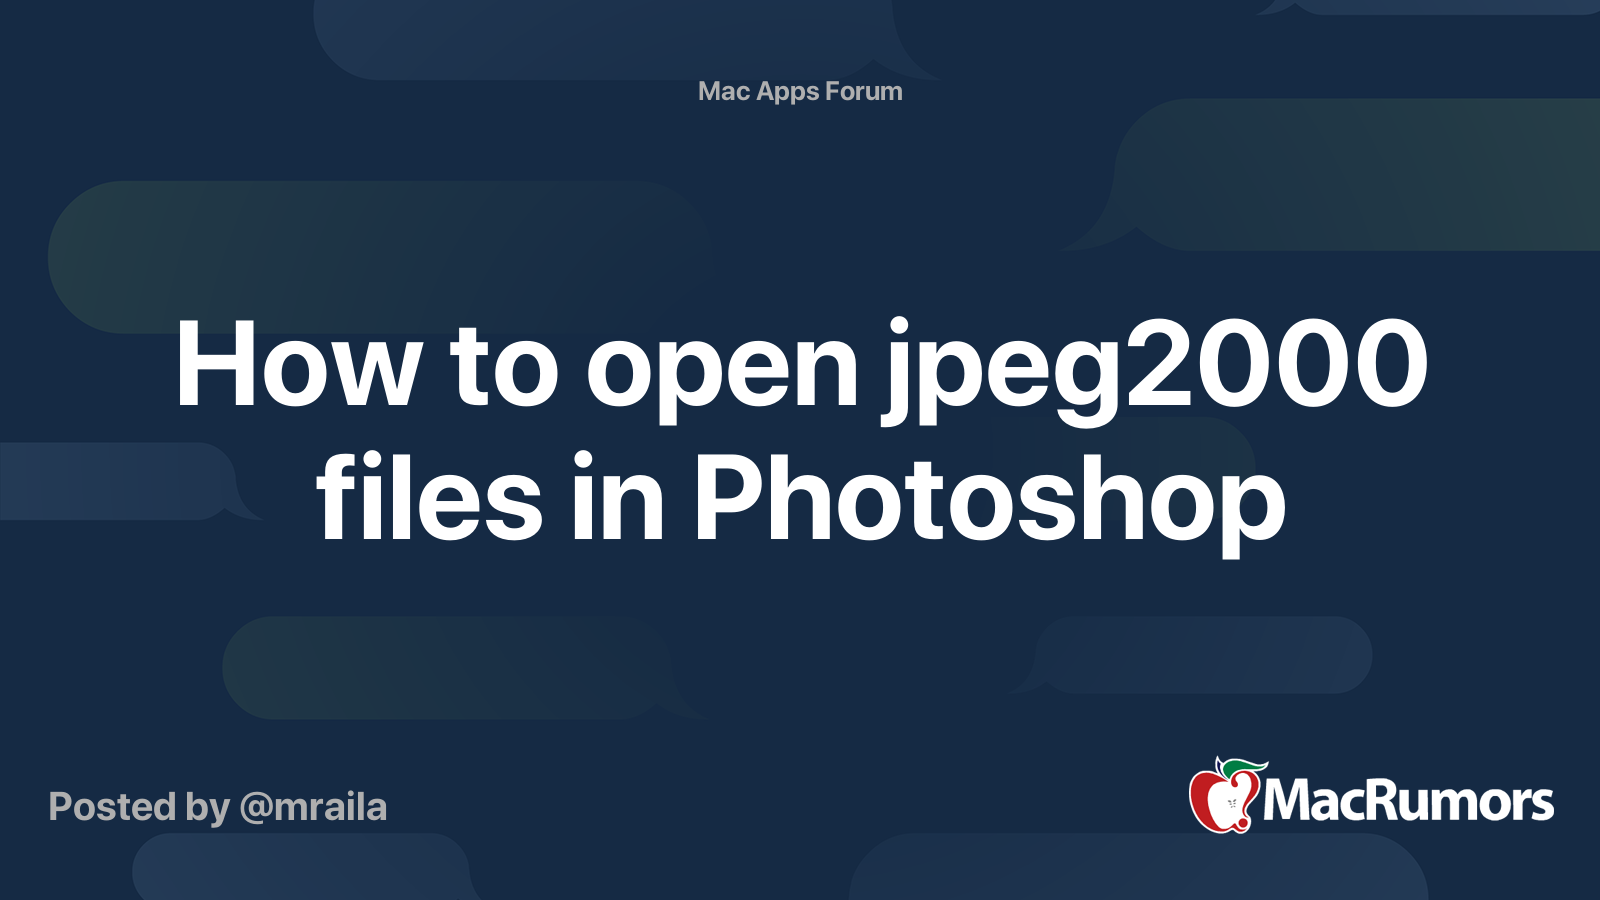 how-to-open-jpeg2000-files-in-photoshop-macrumors-forums